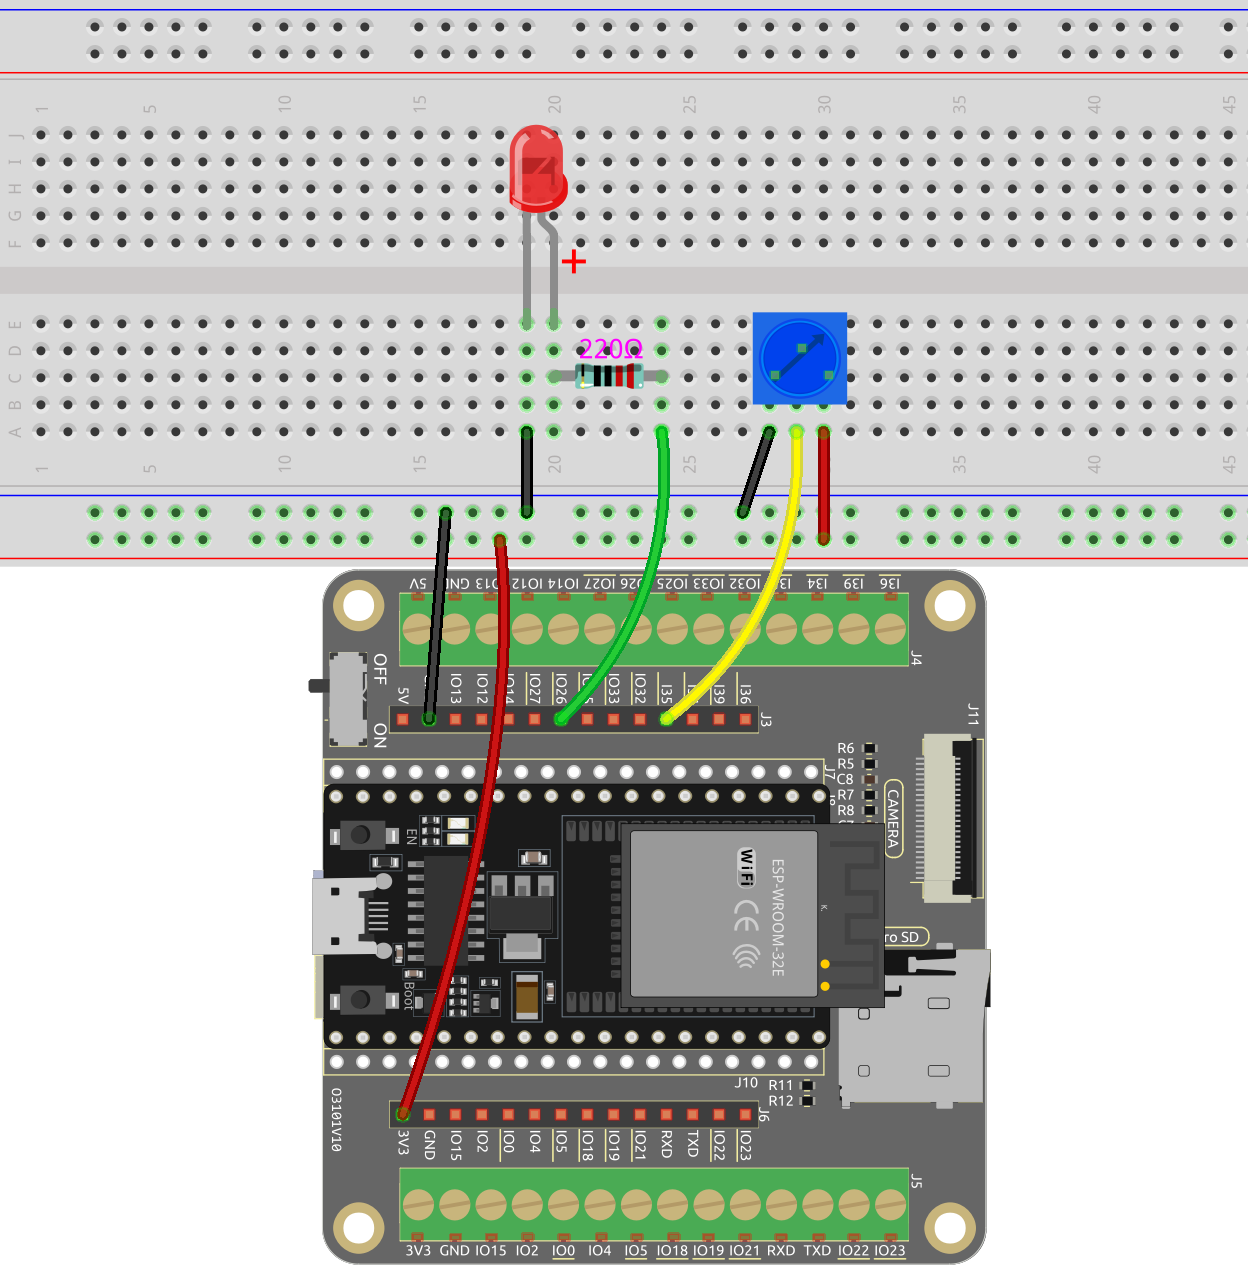 ../../_images/5.8_potentiometer_bb.png